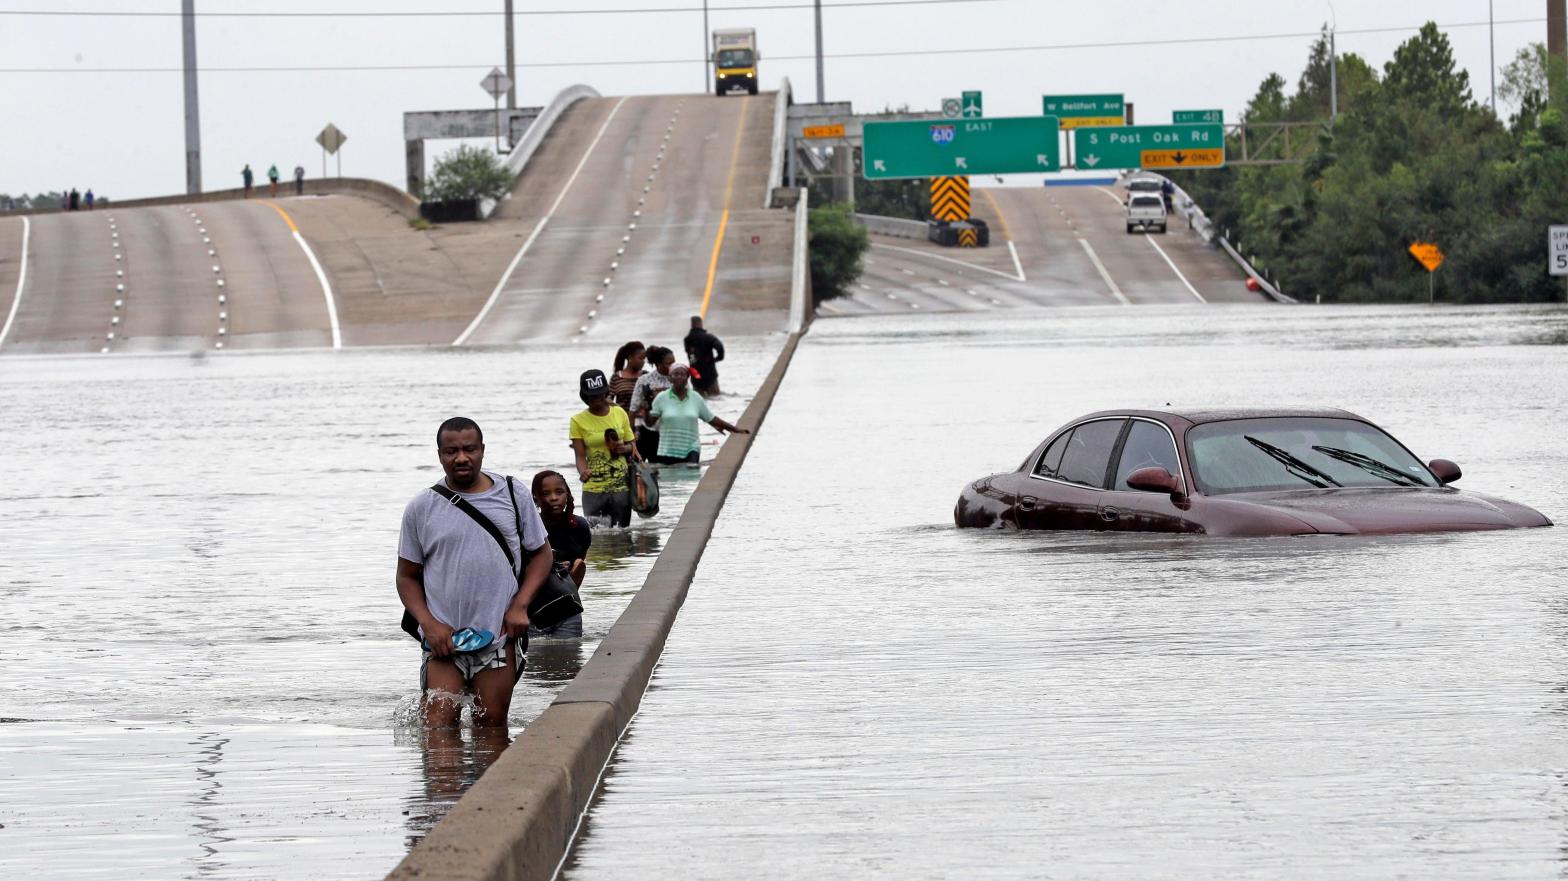 Evacuees wade through floodwaters after Hurricane Harvey in August of 2017.  (Photo: David J. Phillip, File, AP)